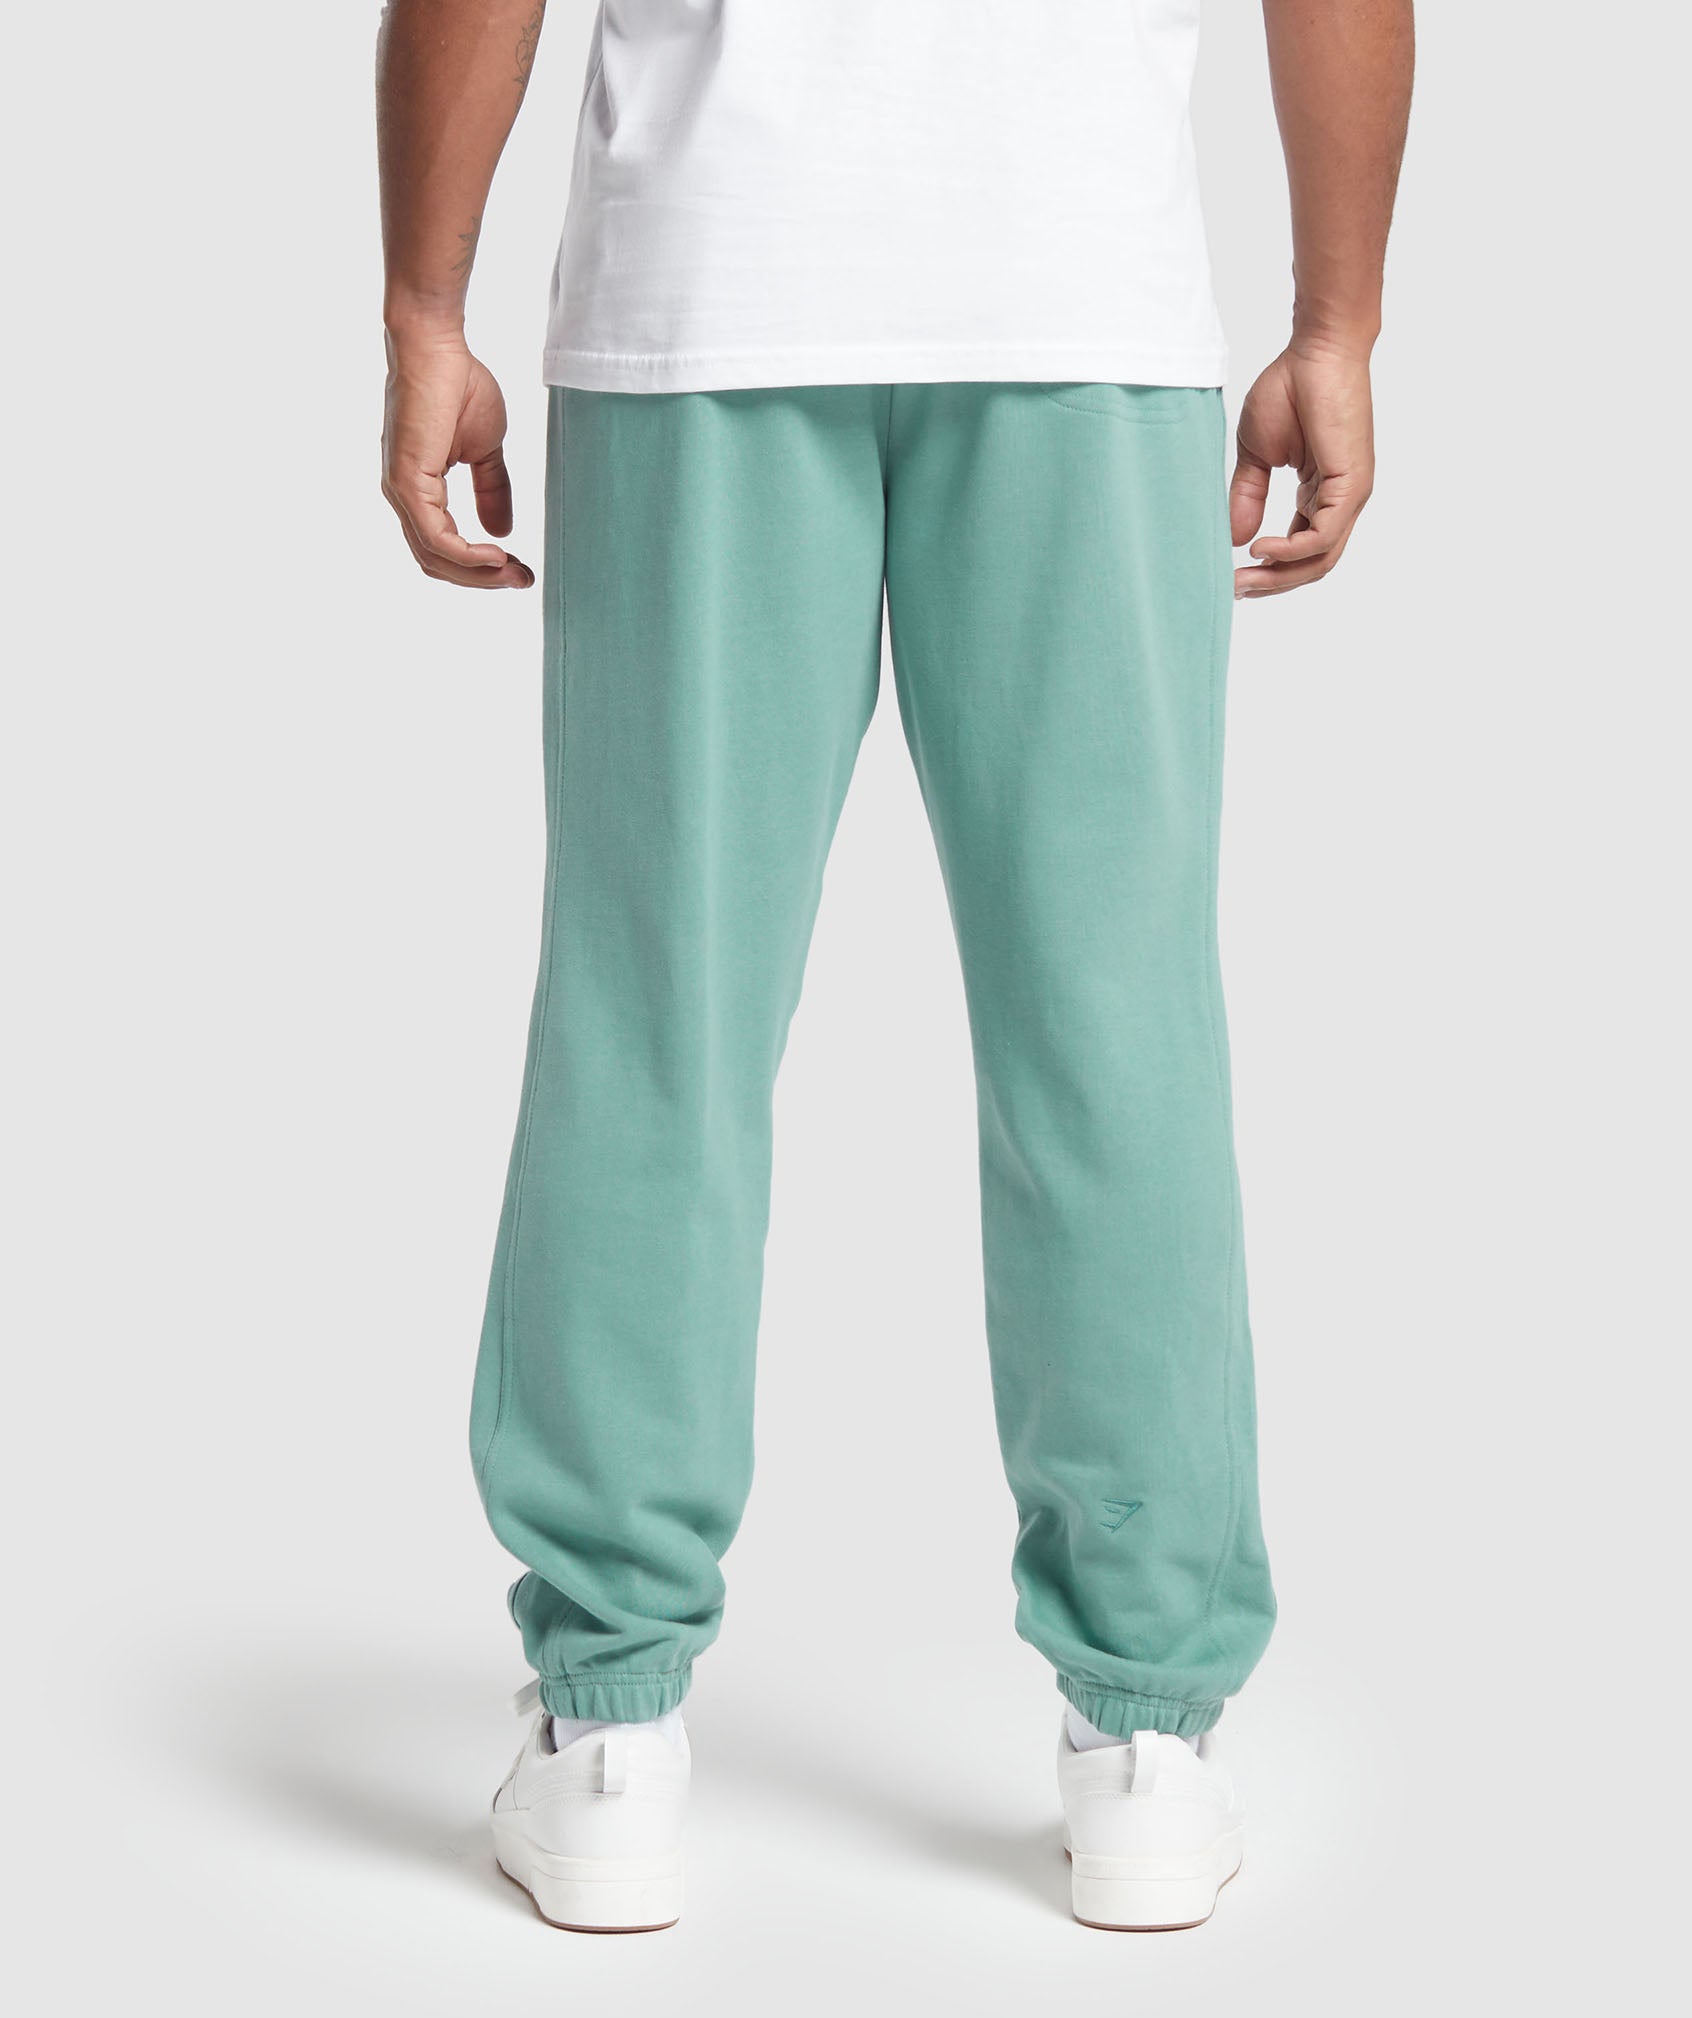 Rest Day Essentials Joggers in Duck Egg Blue - view 2